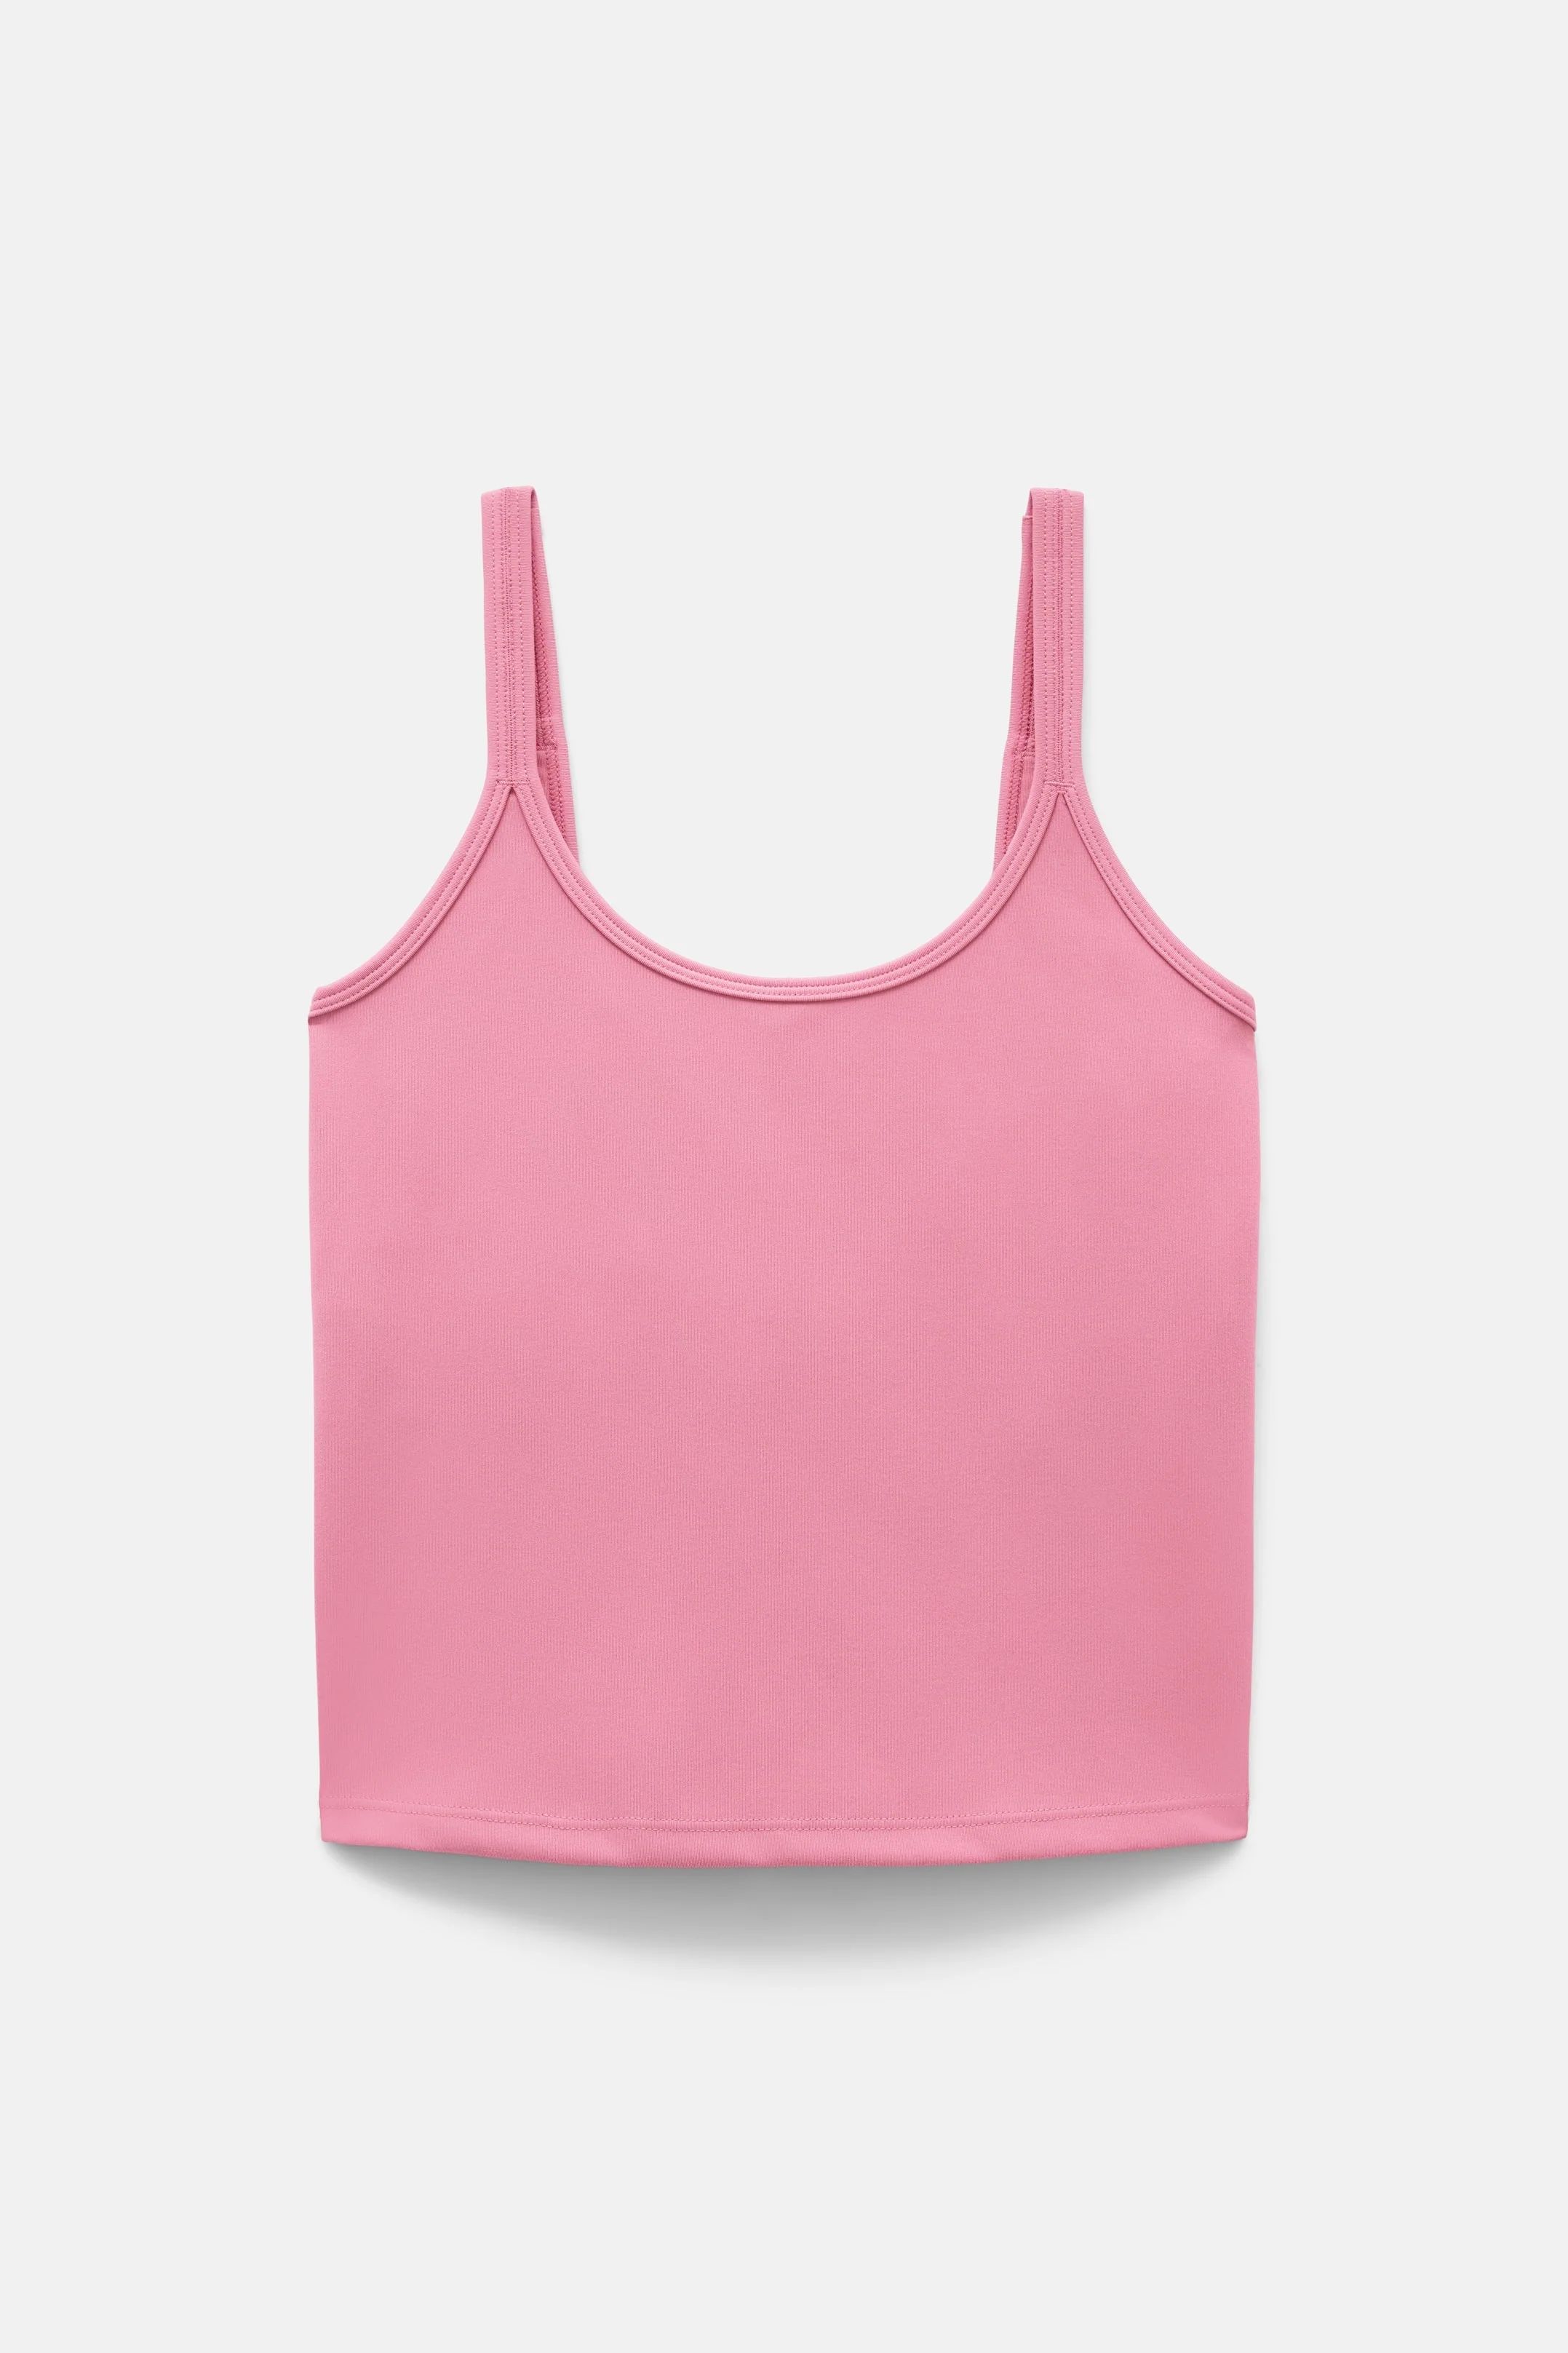 Chateau Gemma Scoop Tank — Girlfriend Collective | Girlfriend Collective